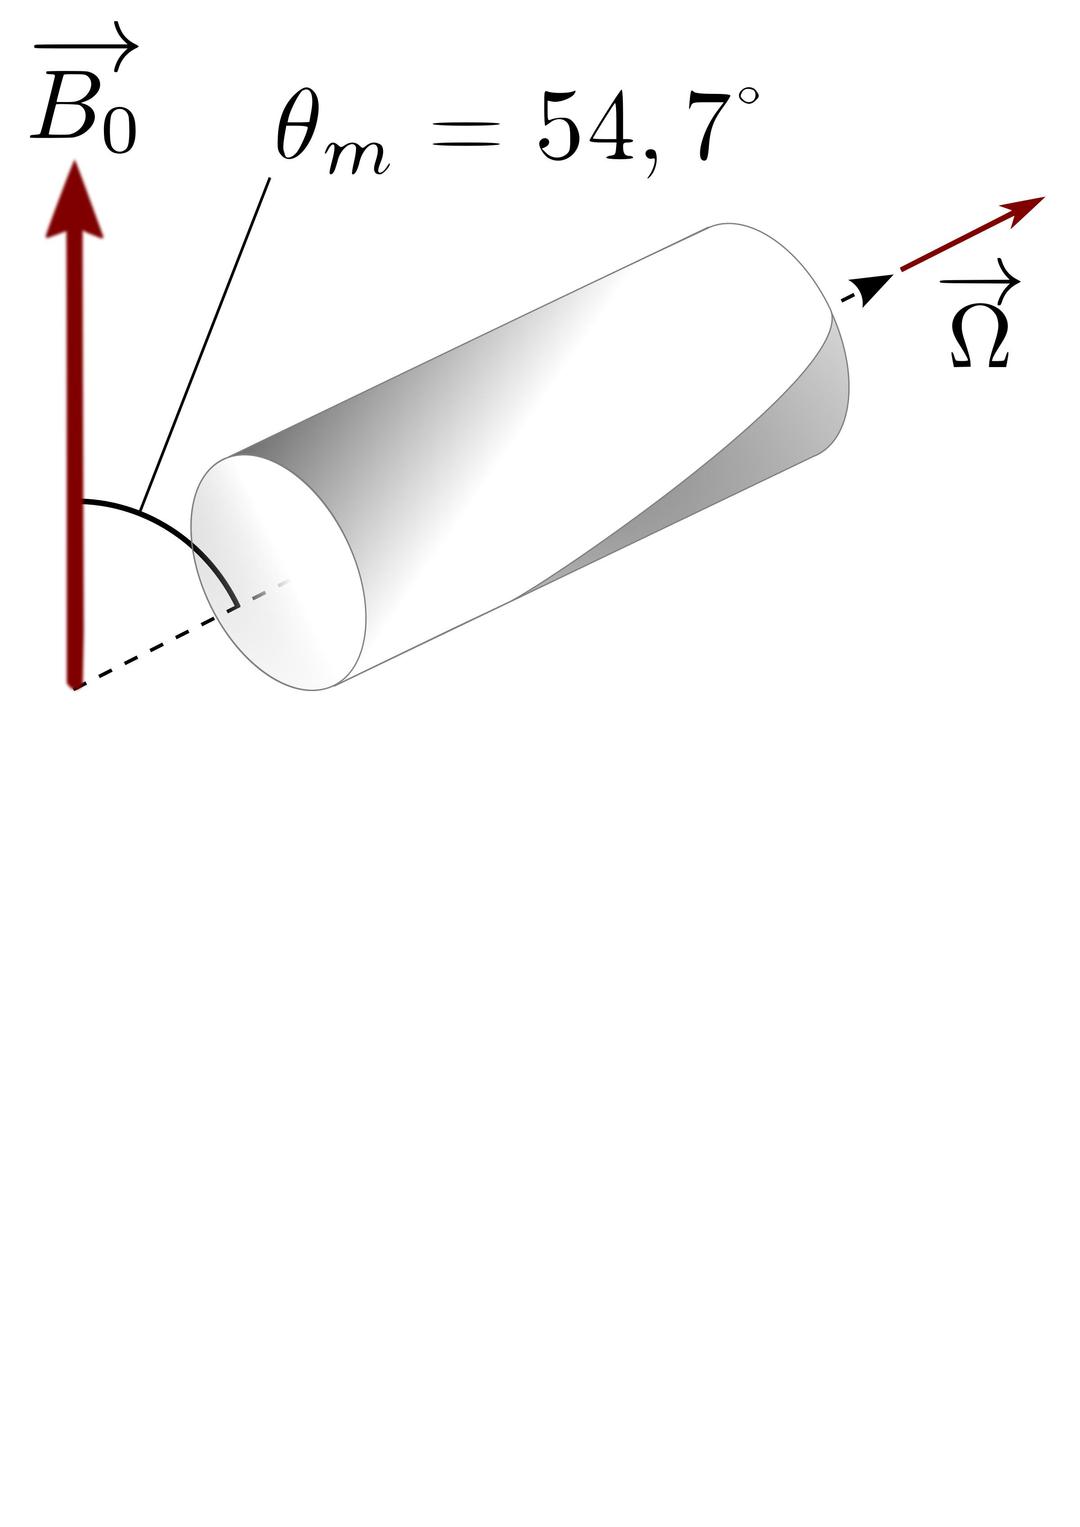 ssNMR spinning rotor png transparent